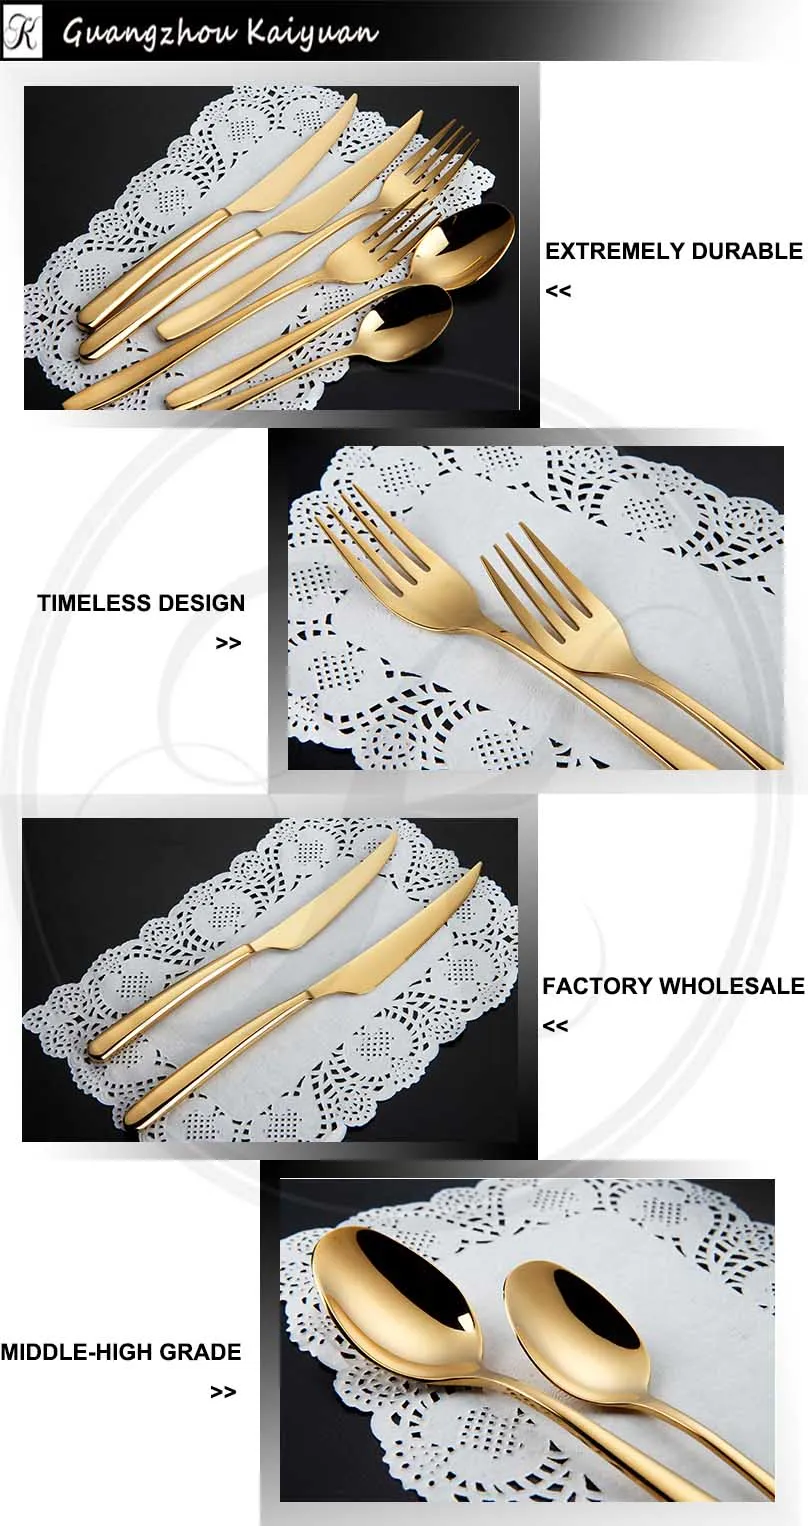 Gold Plated Cutlery,Gold Cutlery Set,Gold Plated Flatware Wholesale - Buy Gold Plated Flatware ...